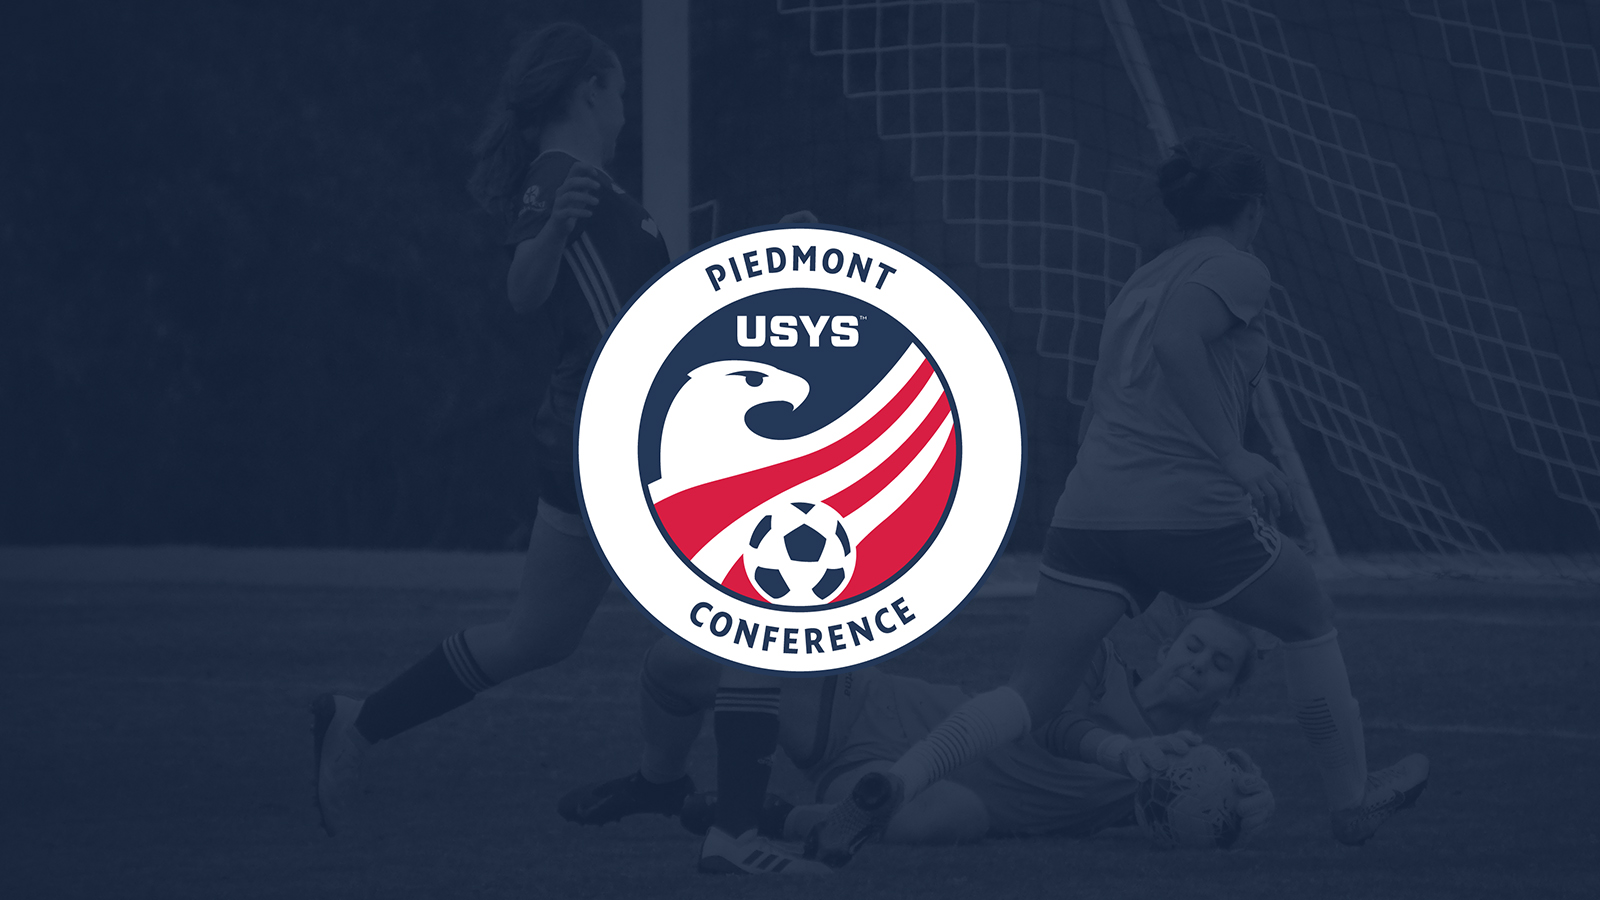 US Youth: Piedmont Conference continues